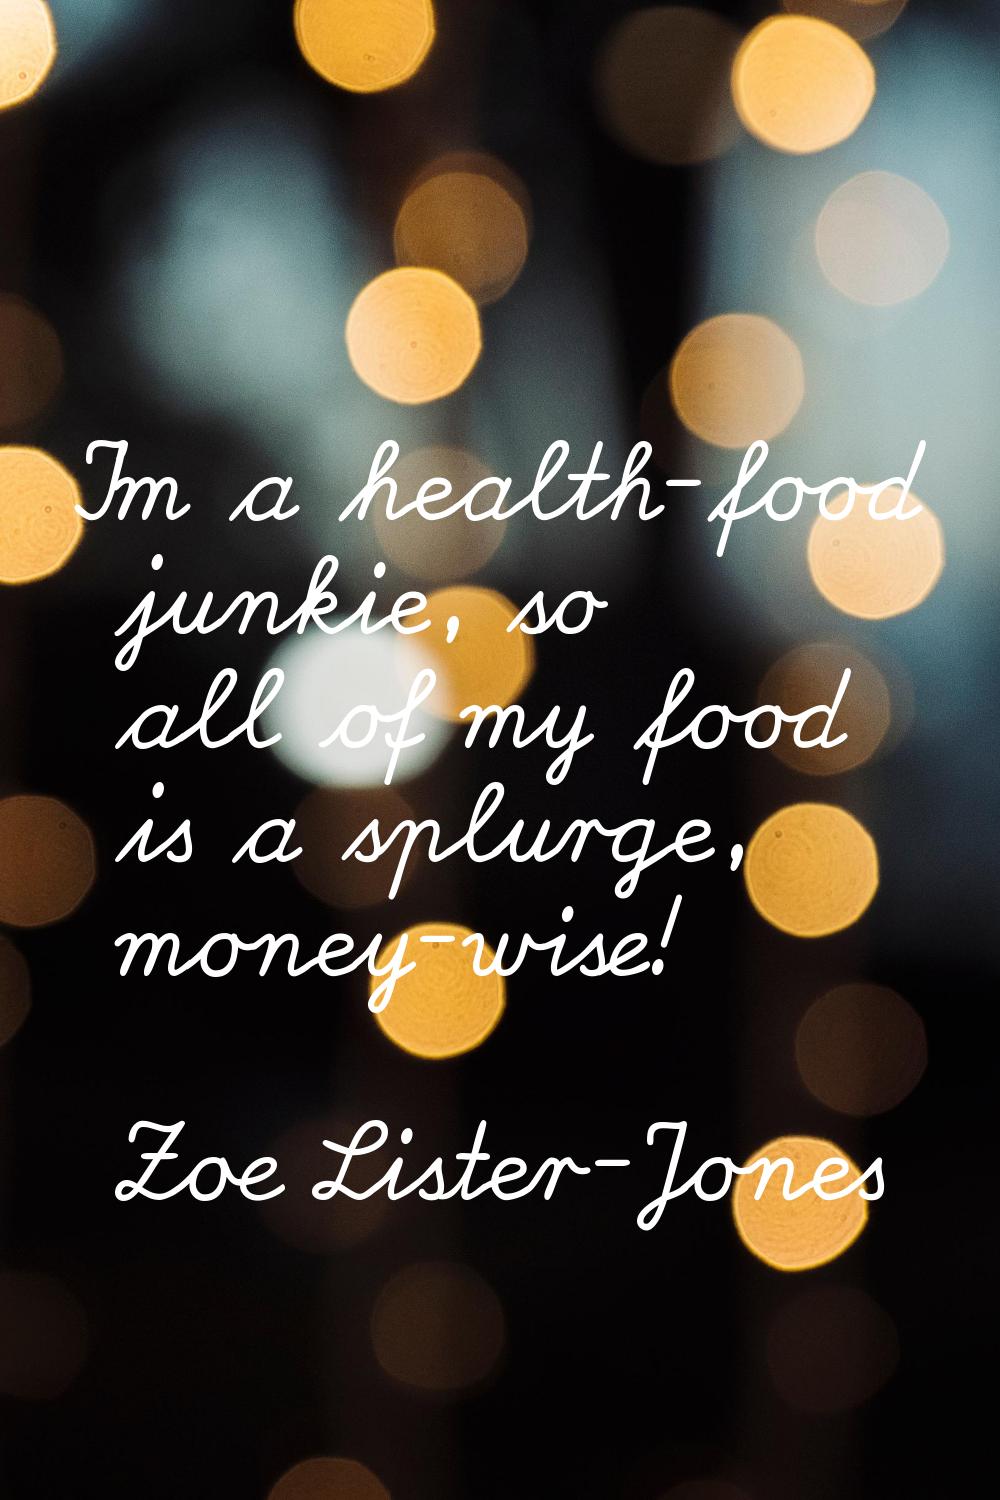 I'm a health-food junkie, so all of my food is a splurge, money-wise!